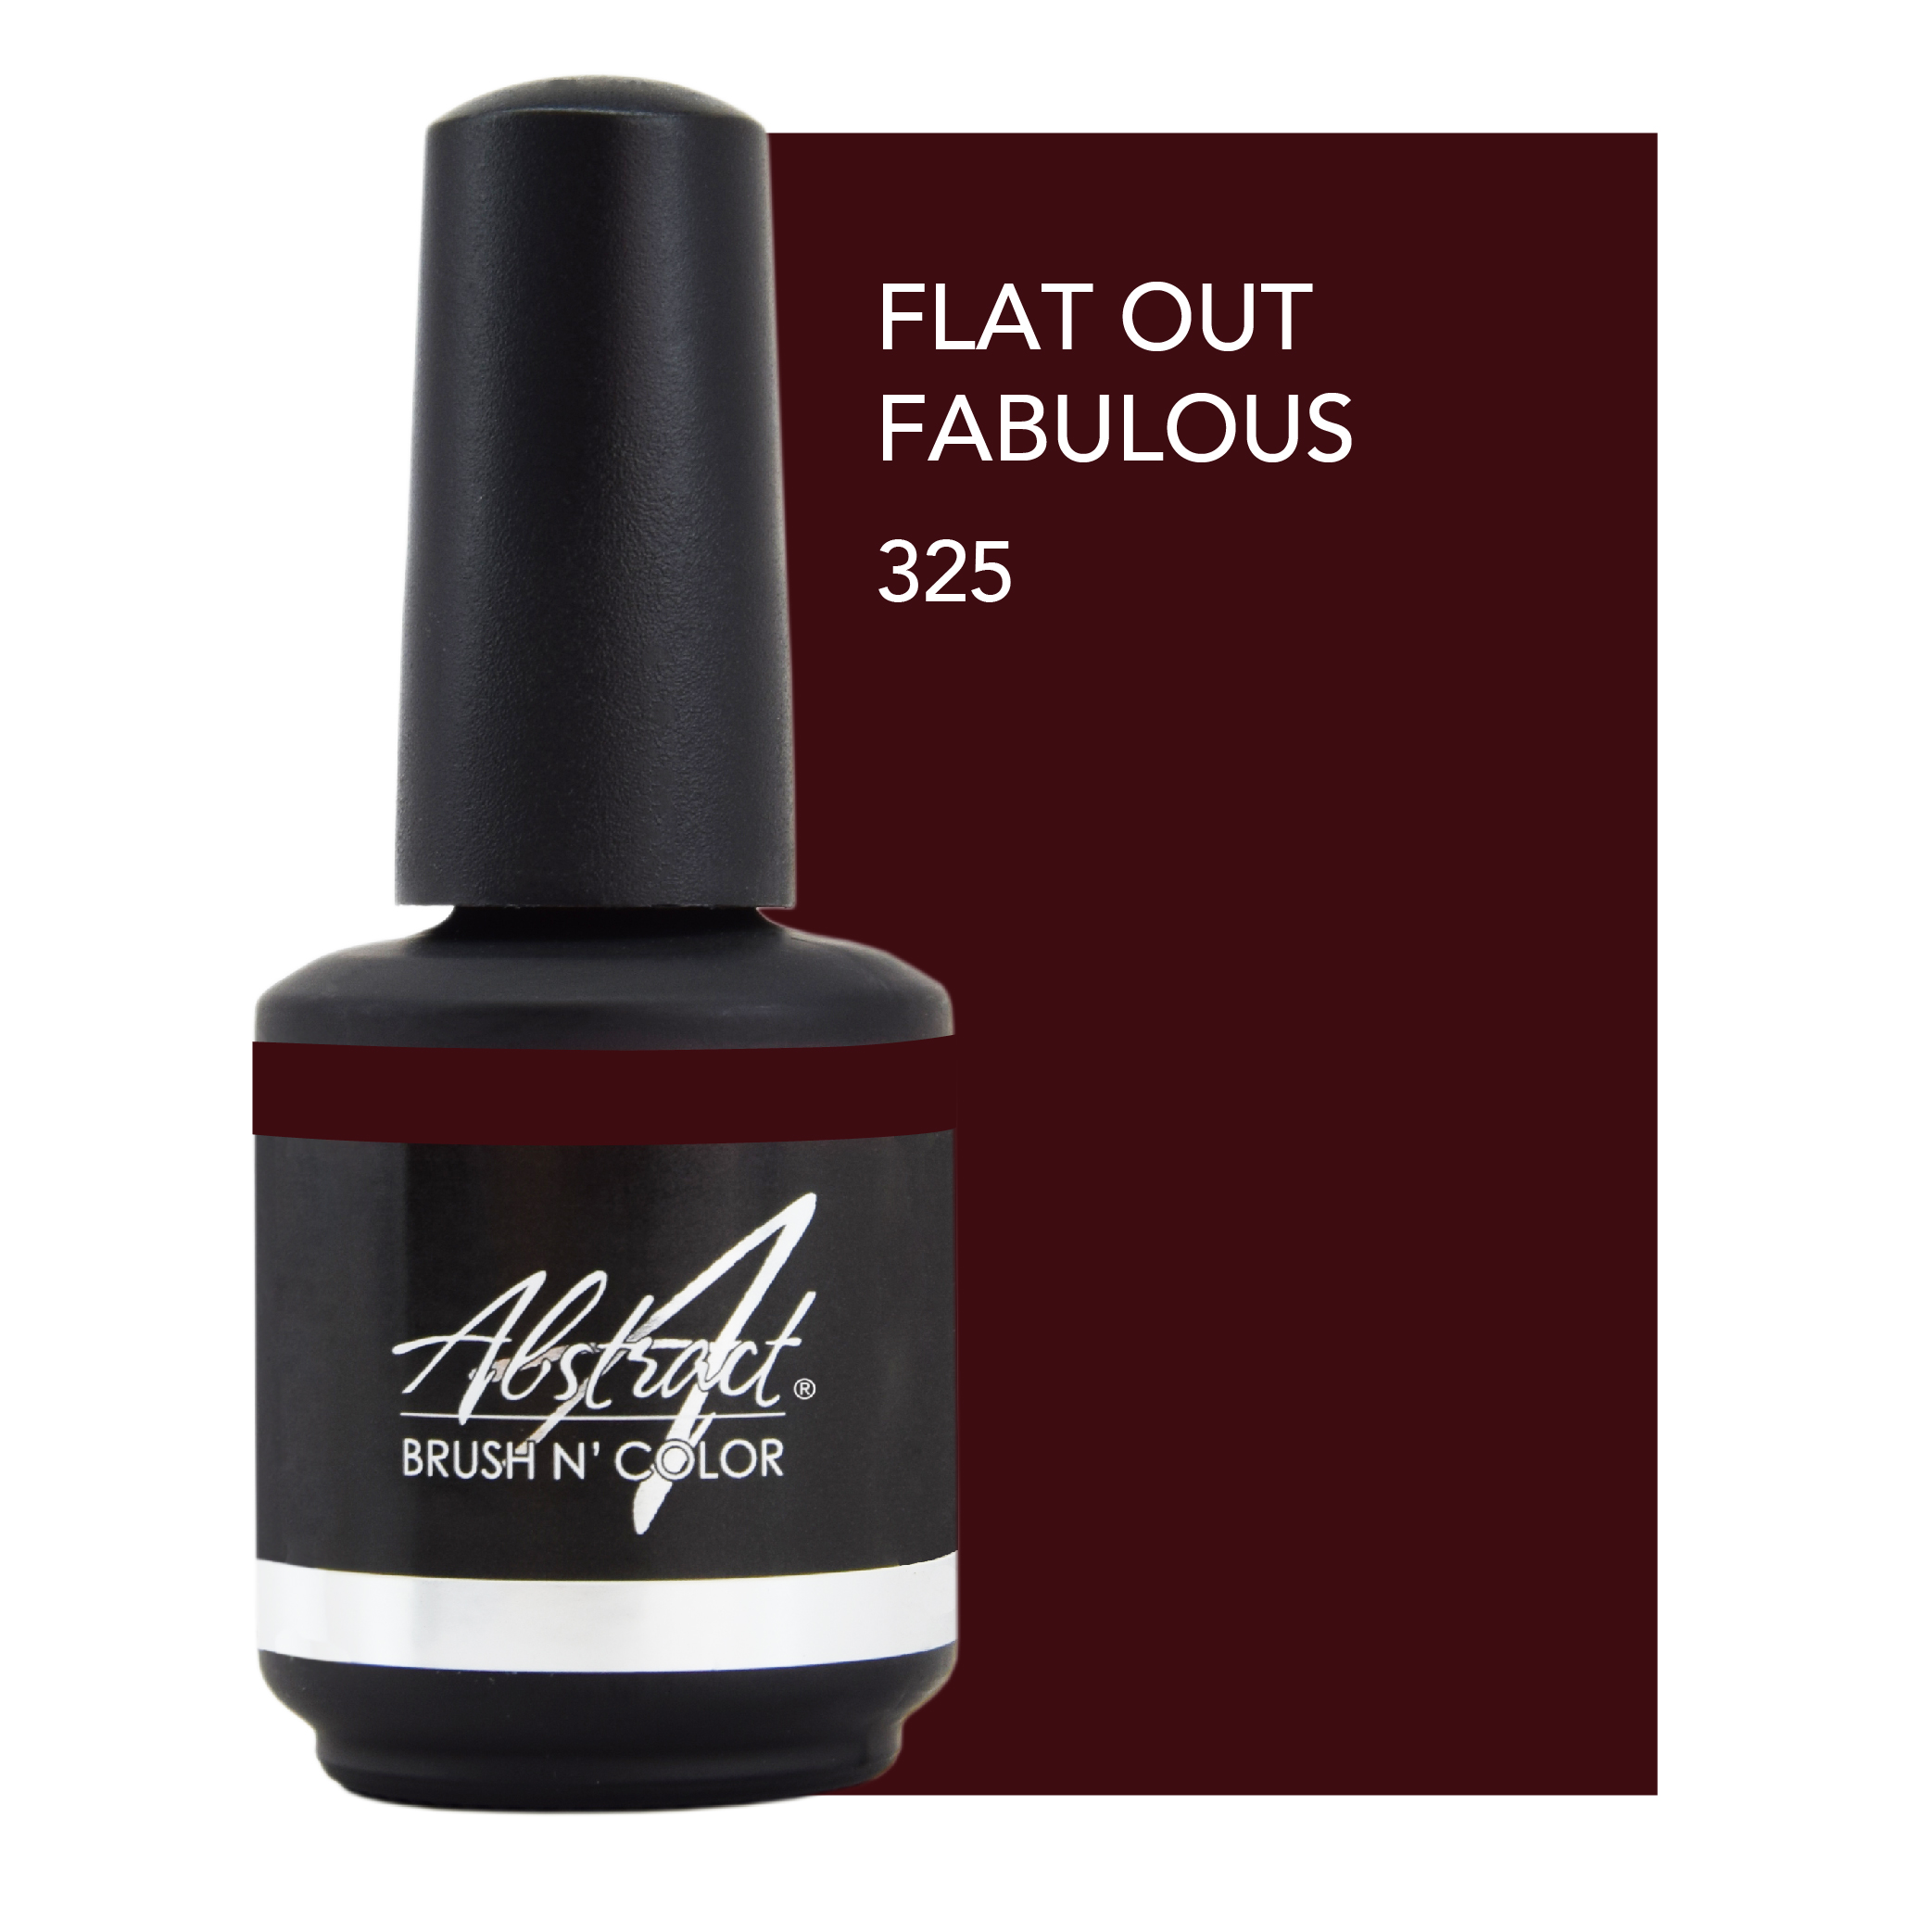 325* Flat Out Fabulous 15ml (Public Desire), Abstract | 137507